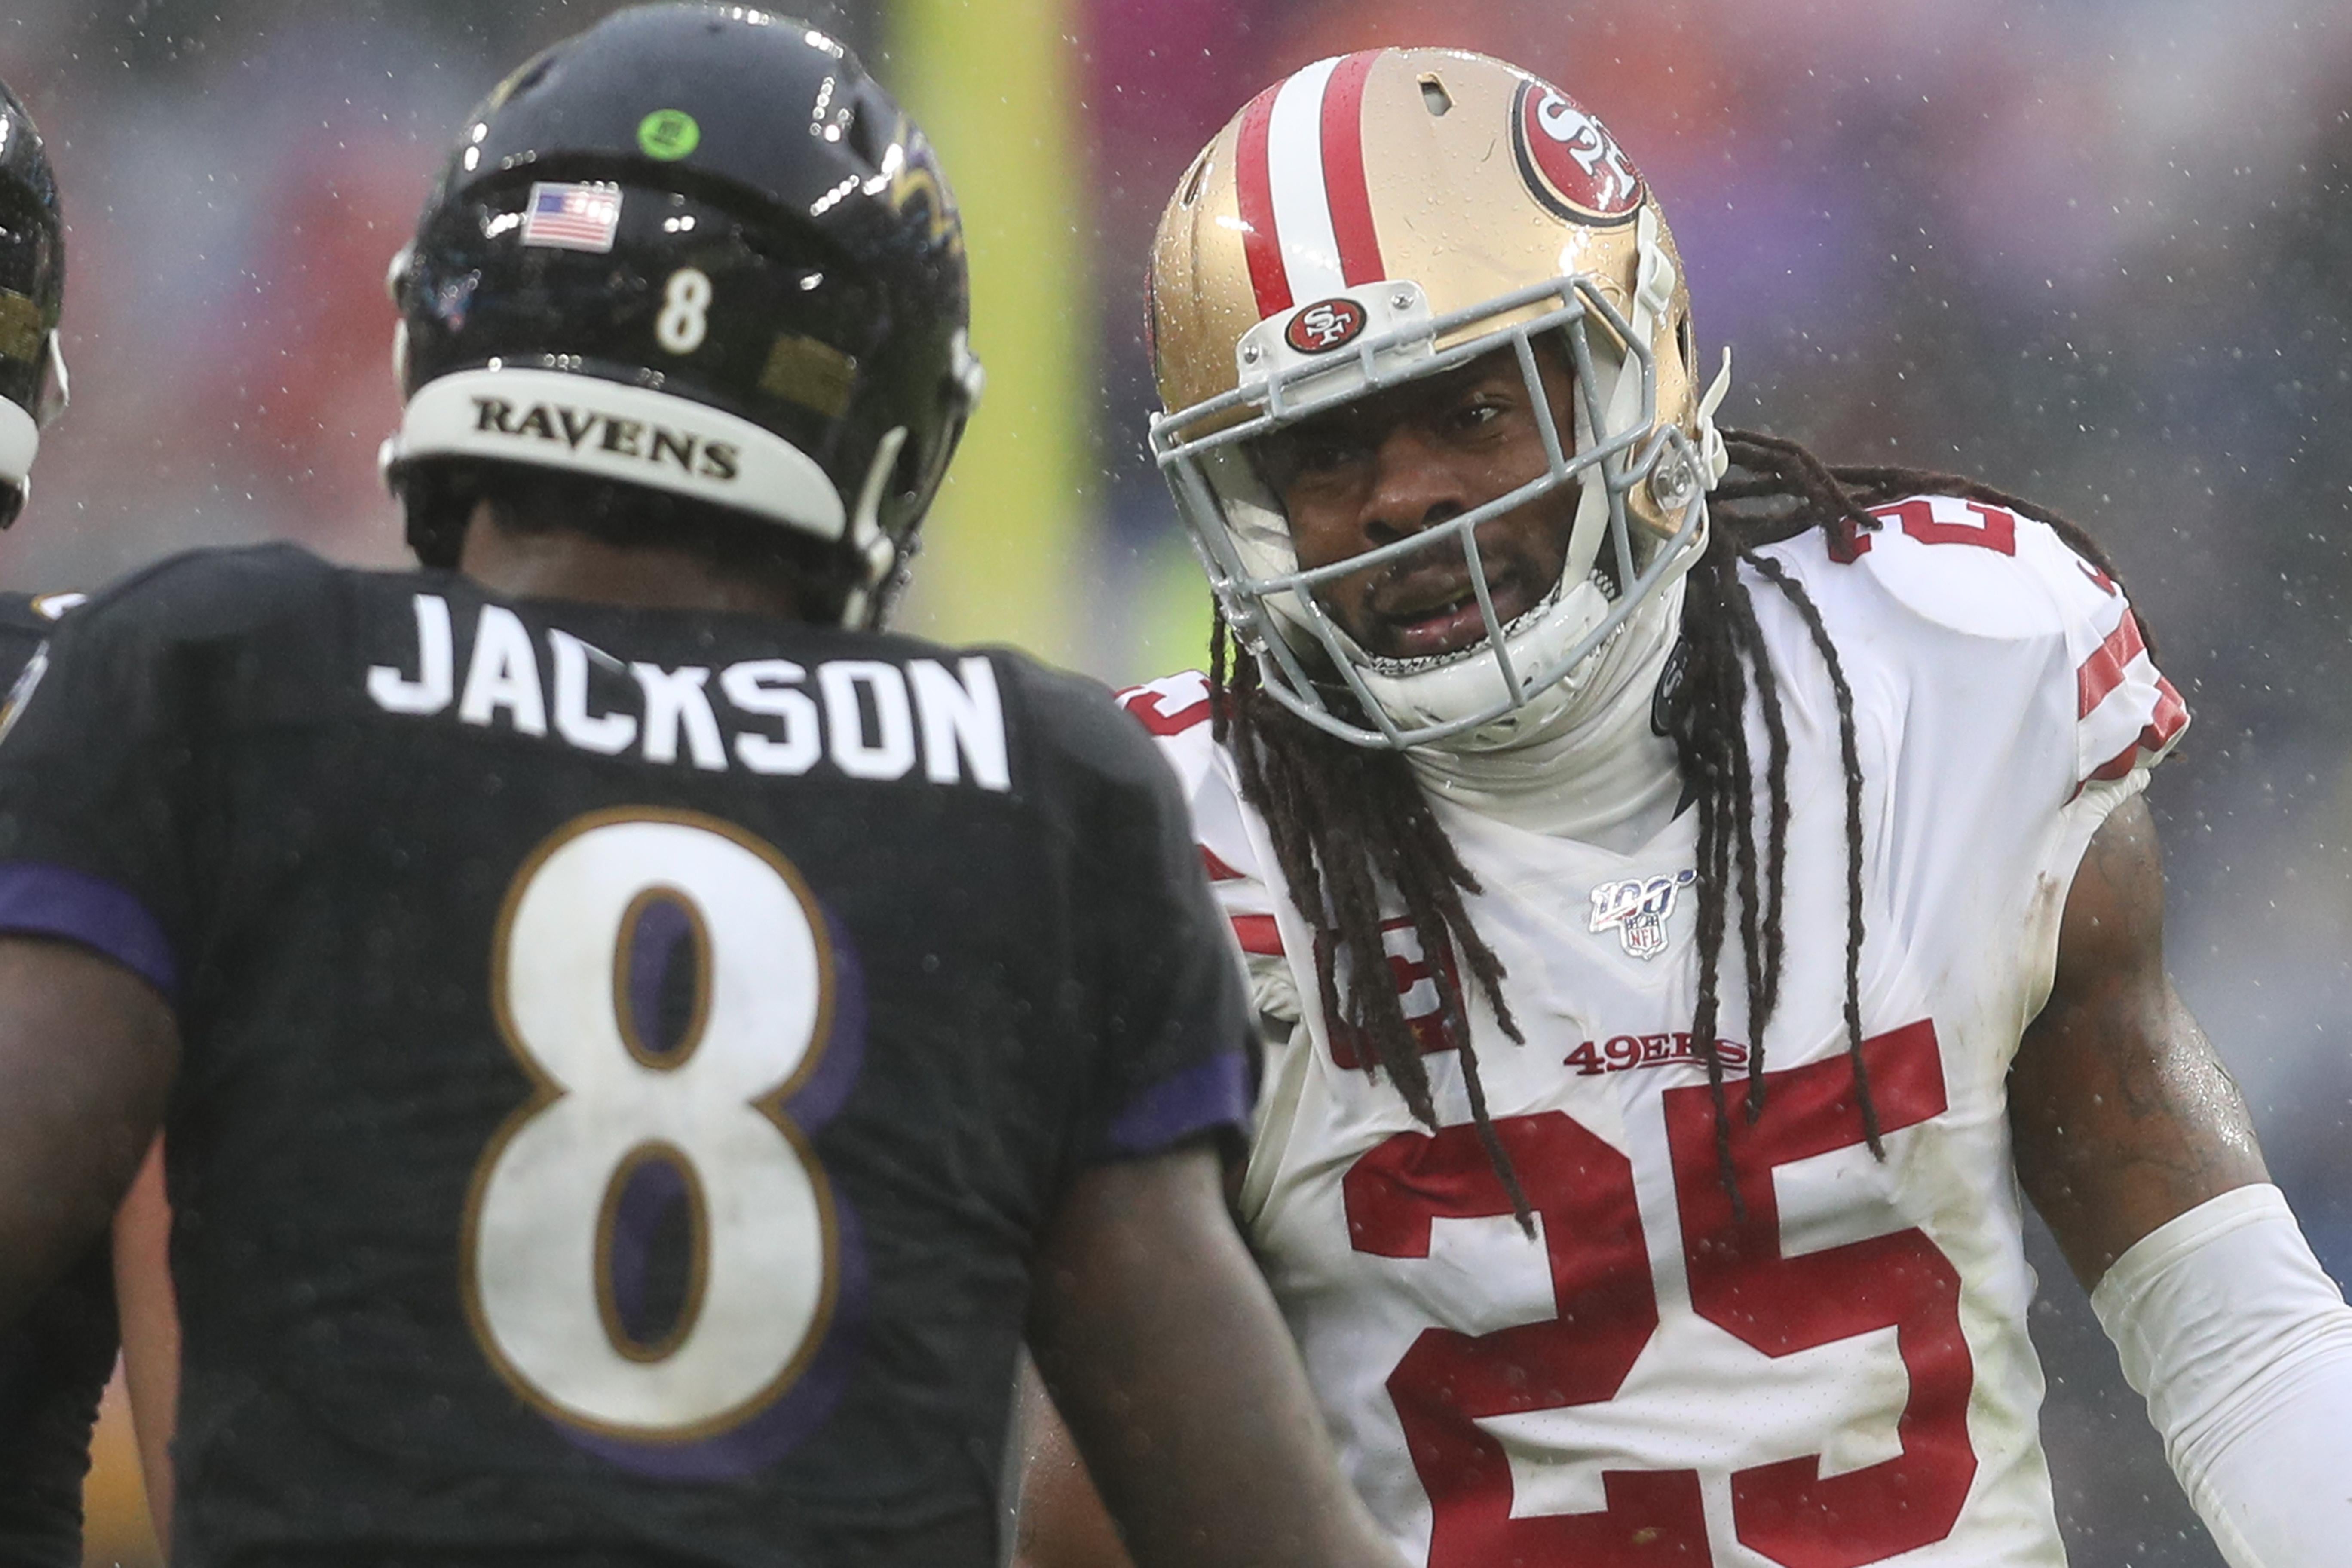 BALTIMORE, MARYLAND - DECEMBER 01: Quarterback Lamar Jackson #8 of the Baltimore Ravens and cornerback Richard Sherman #25 of the San Francisco 49ers talk during the second half at M&T Bank Stadium on December 01, 2019 in Baltimore, Maryland. (Photo by Patrick Smith/Getty Images)